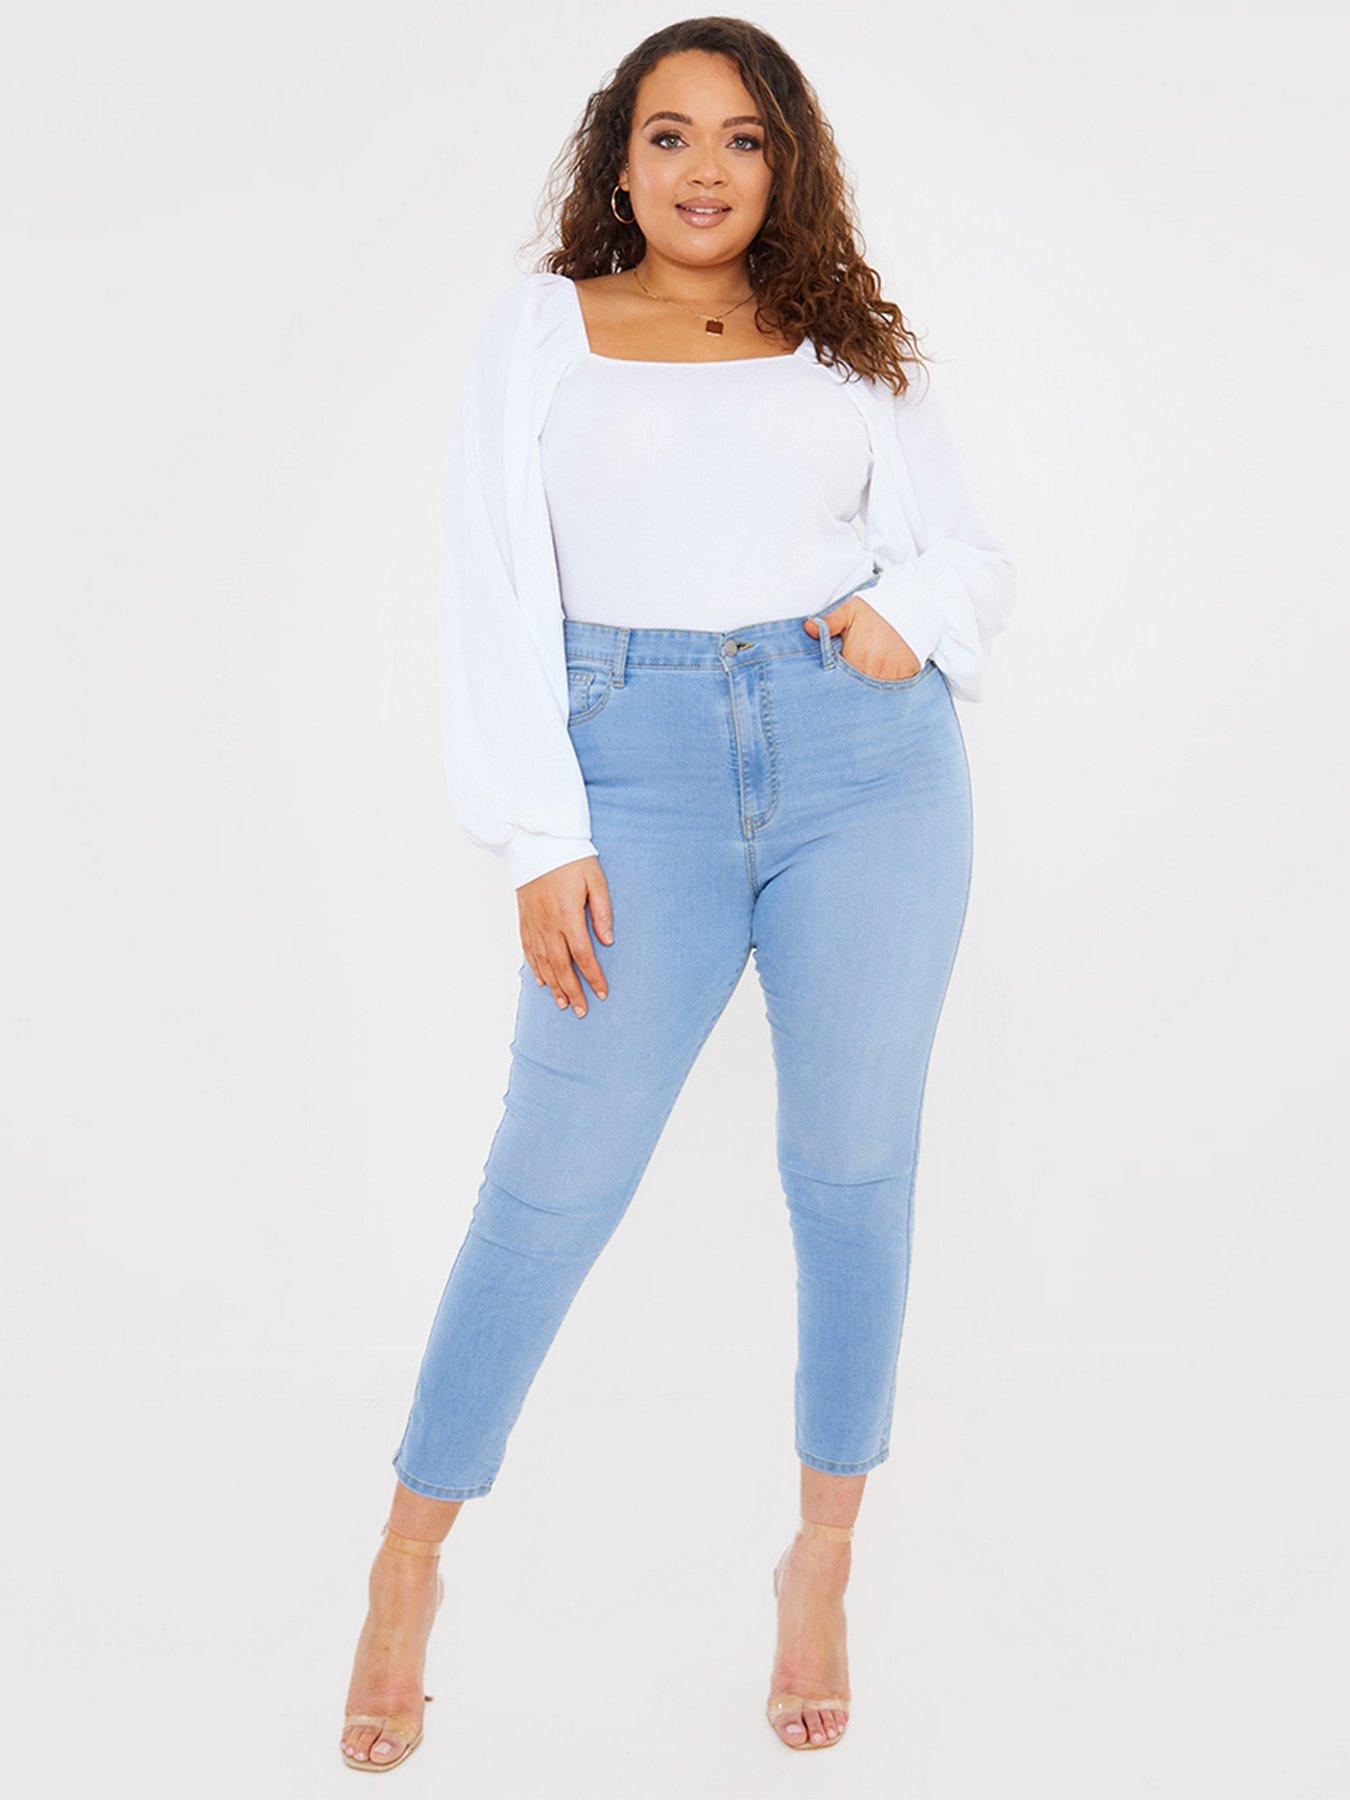 Jeans In The Style Curve Jac Jossa Light Blue Wash Skinny Jeans